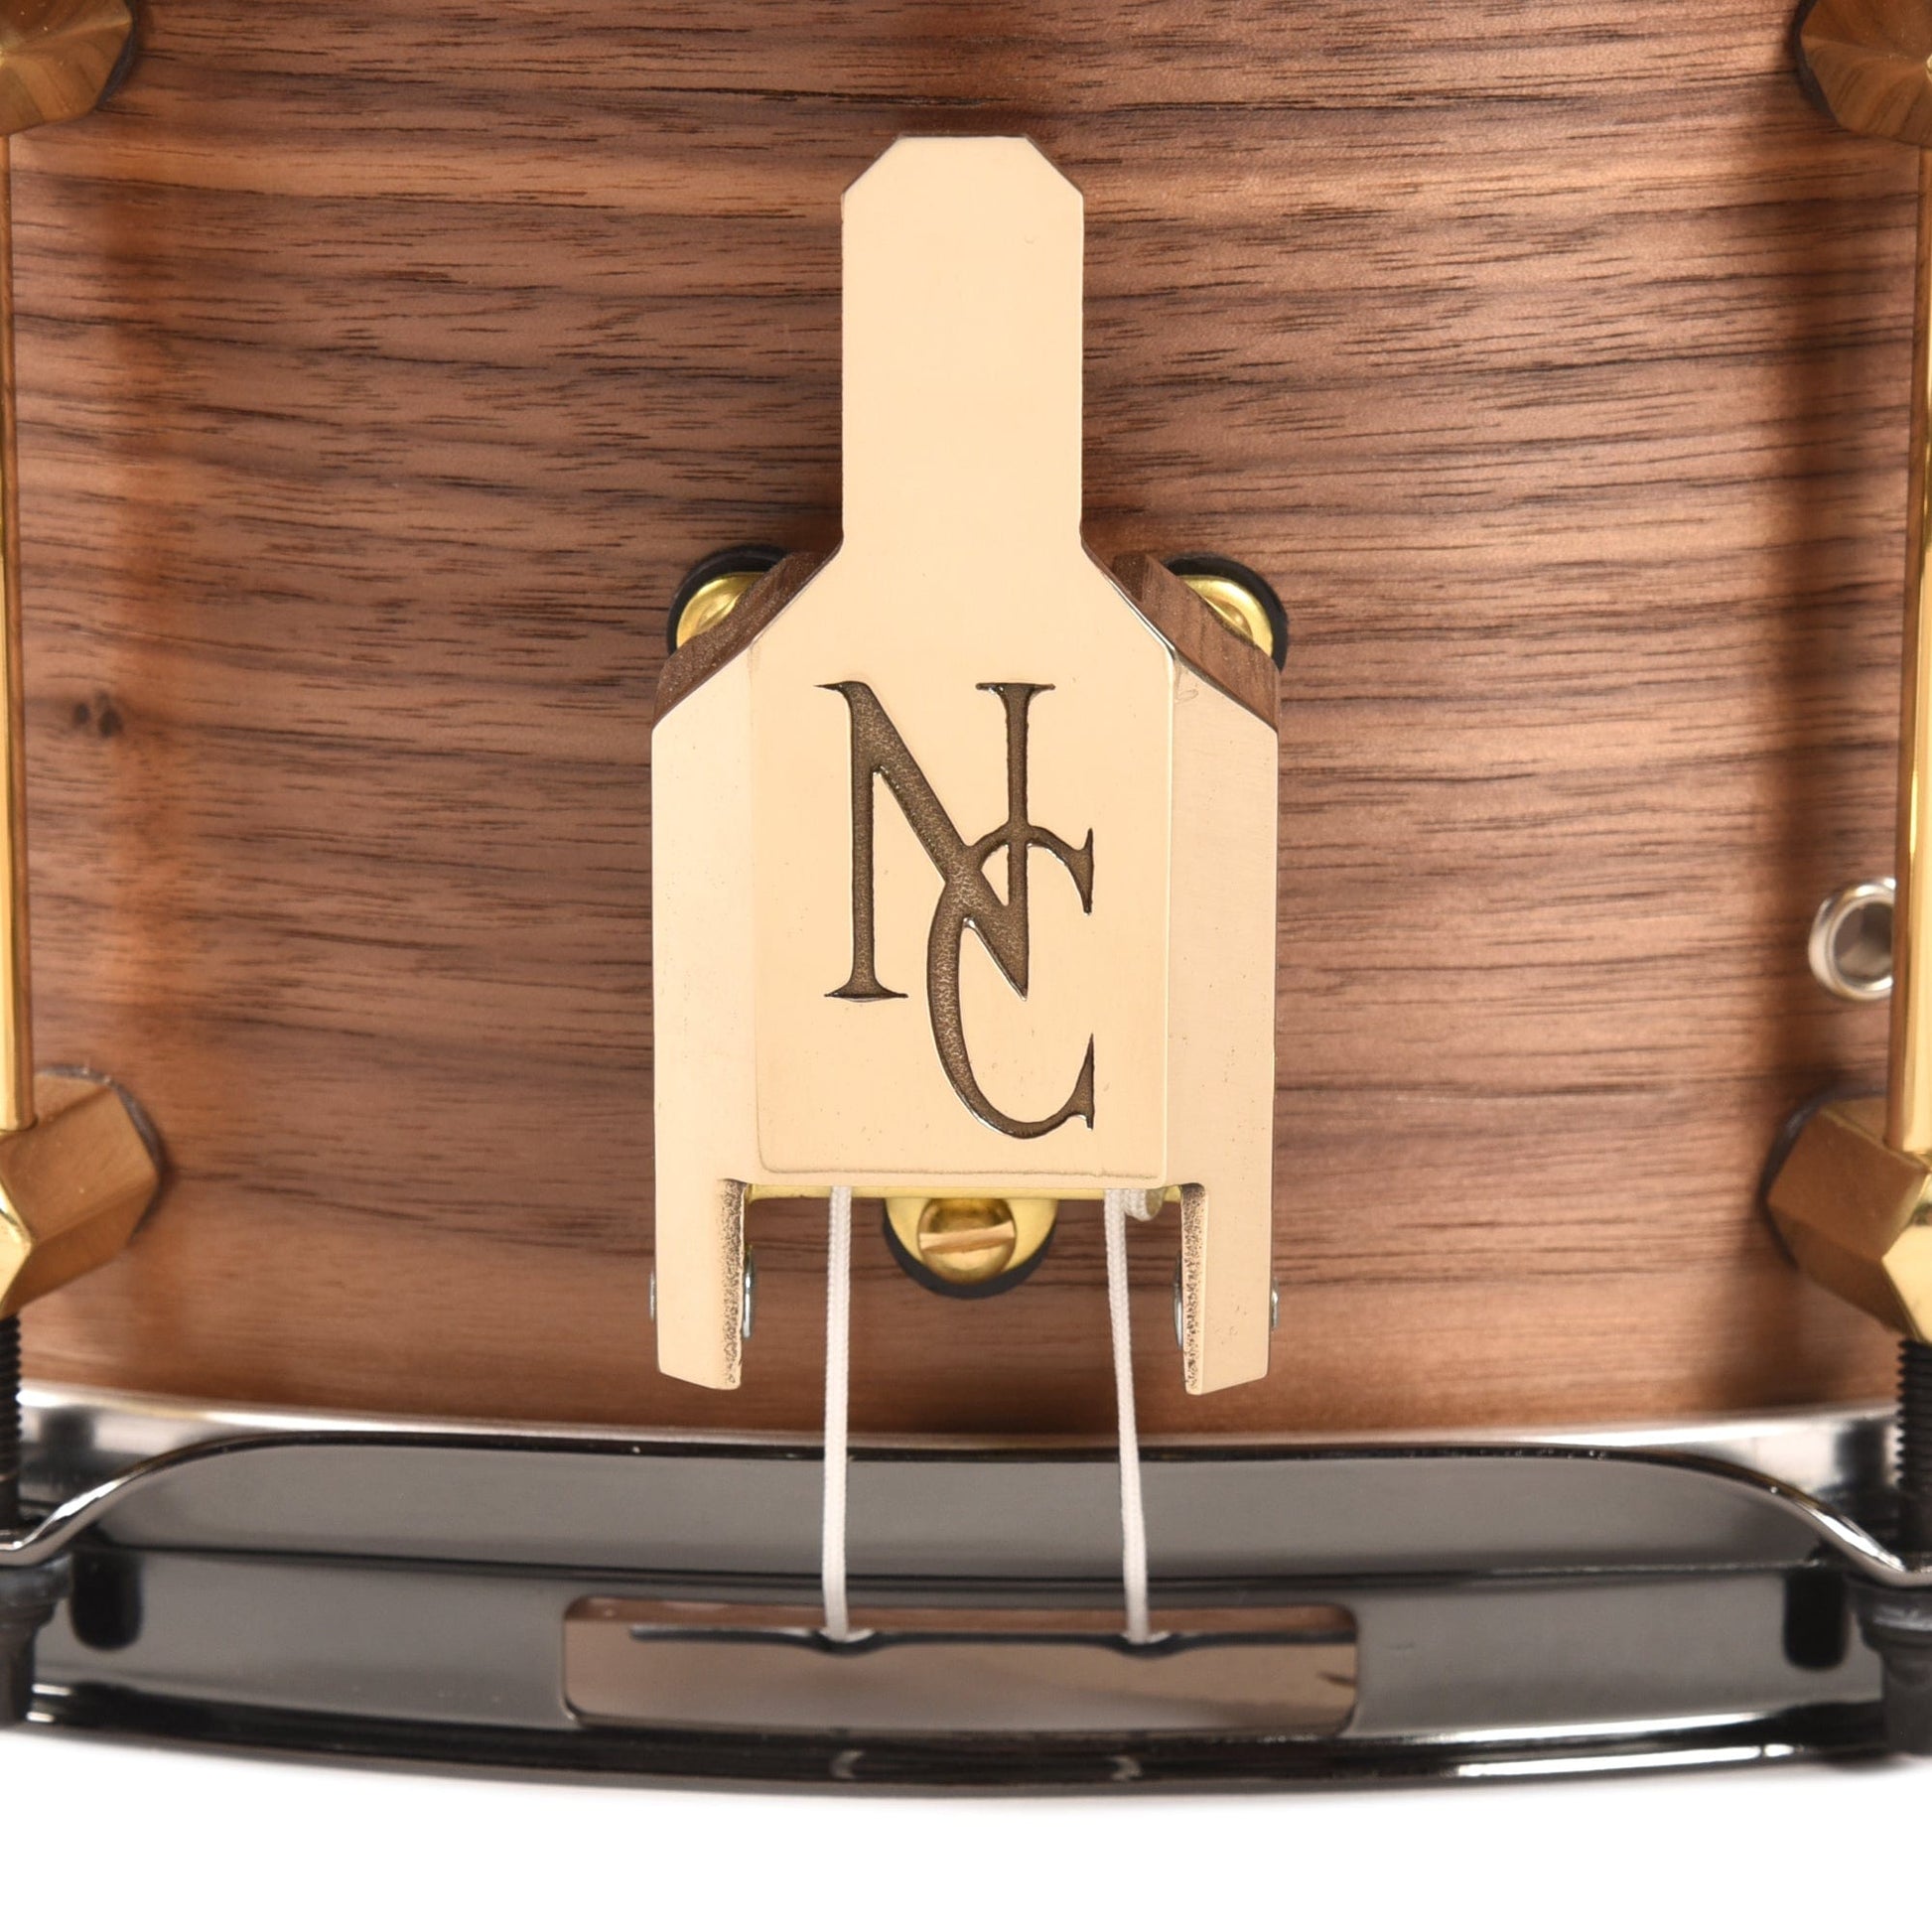 Noble & Cooley 6.5x14 Walnut Ply Snare Drum Natural Oil w/Brass & Black Nickel Hardware Drums and Percussion / Acoustic Drums / Snare